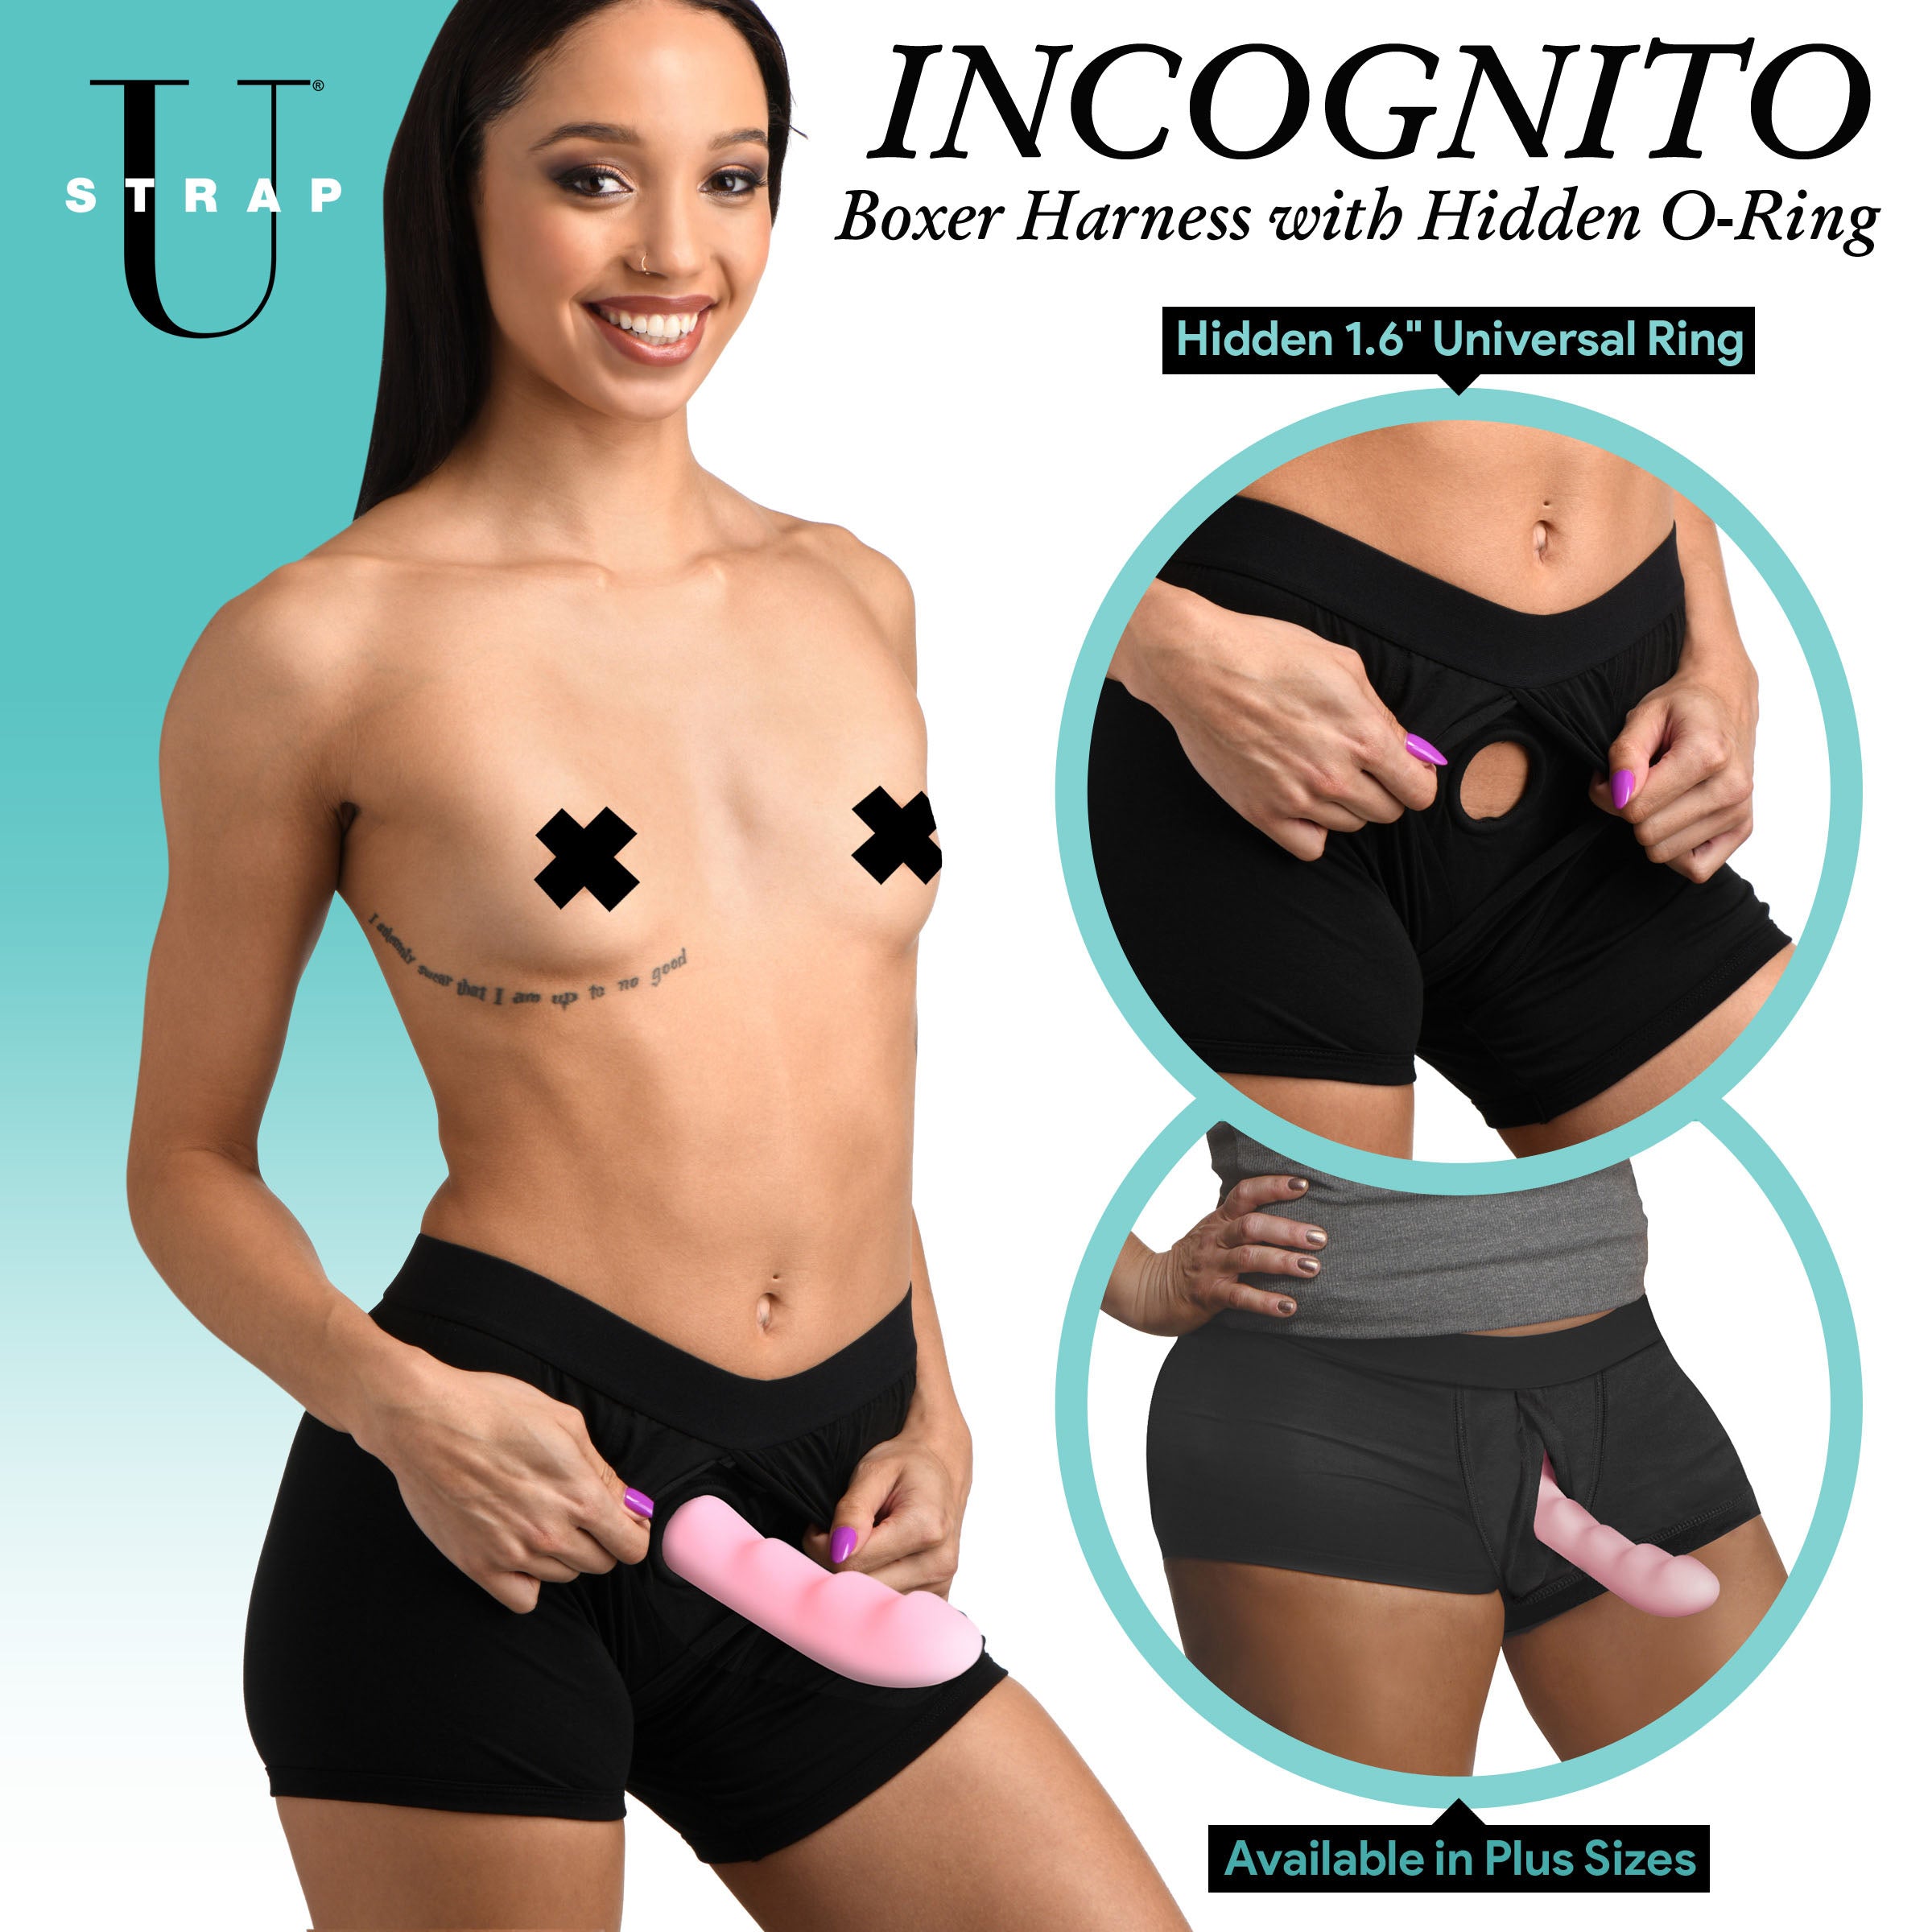 Incognito Boxer Harness with Hidden O-Ring Medium/Large